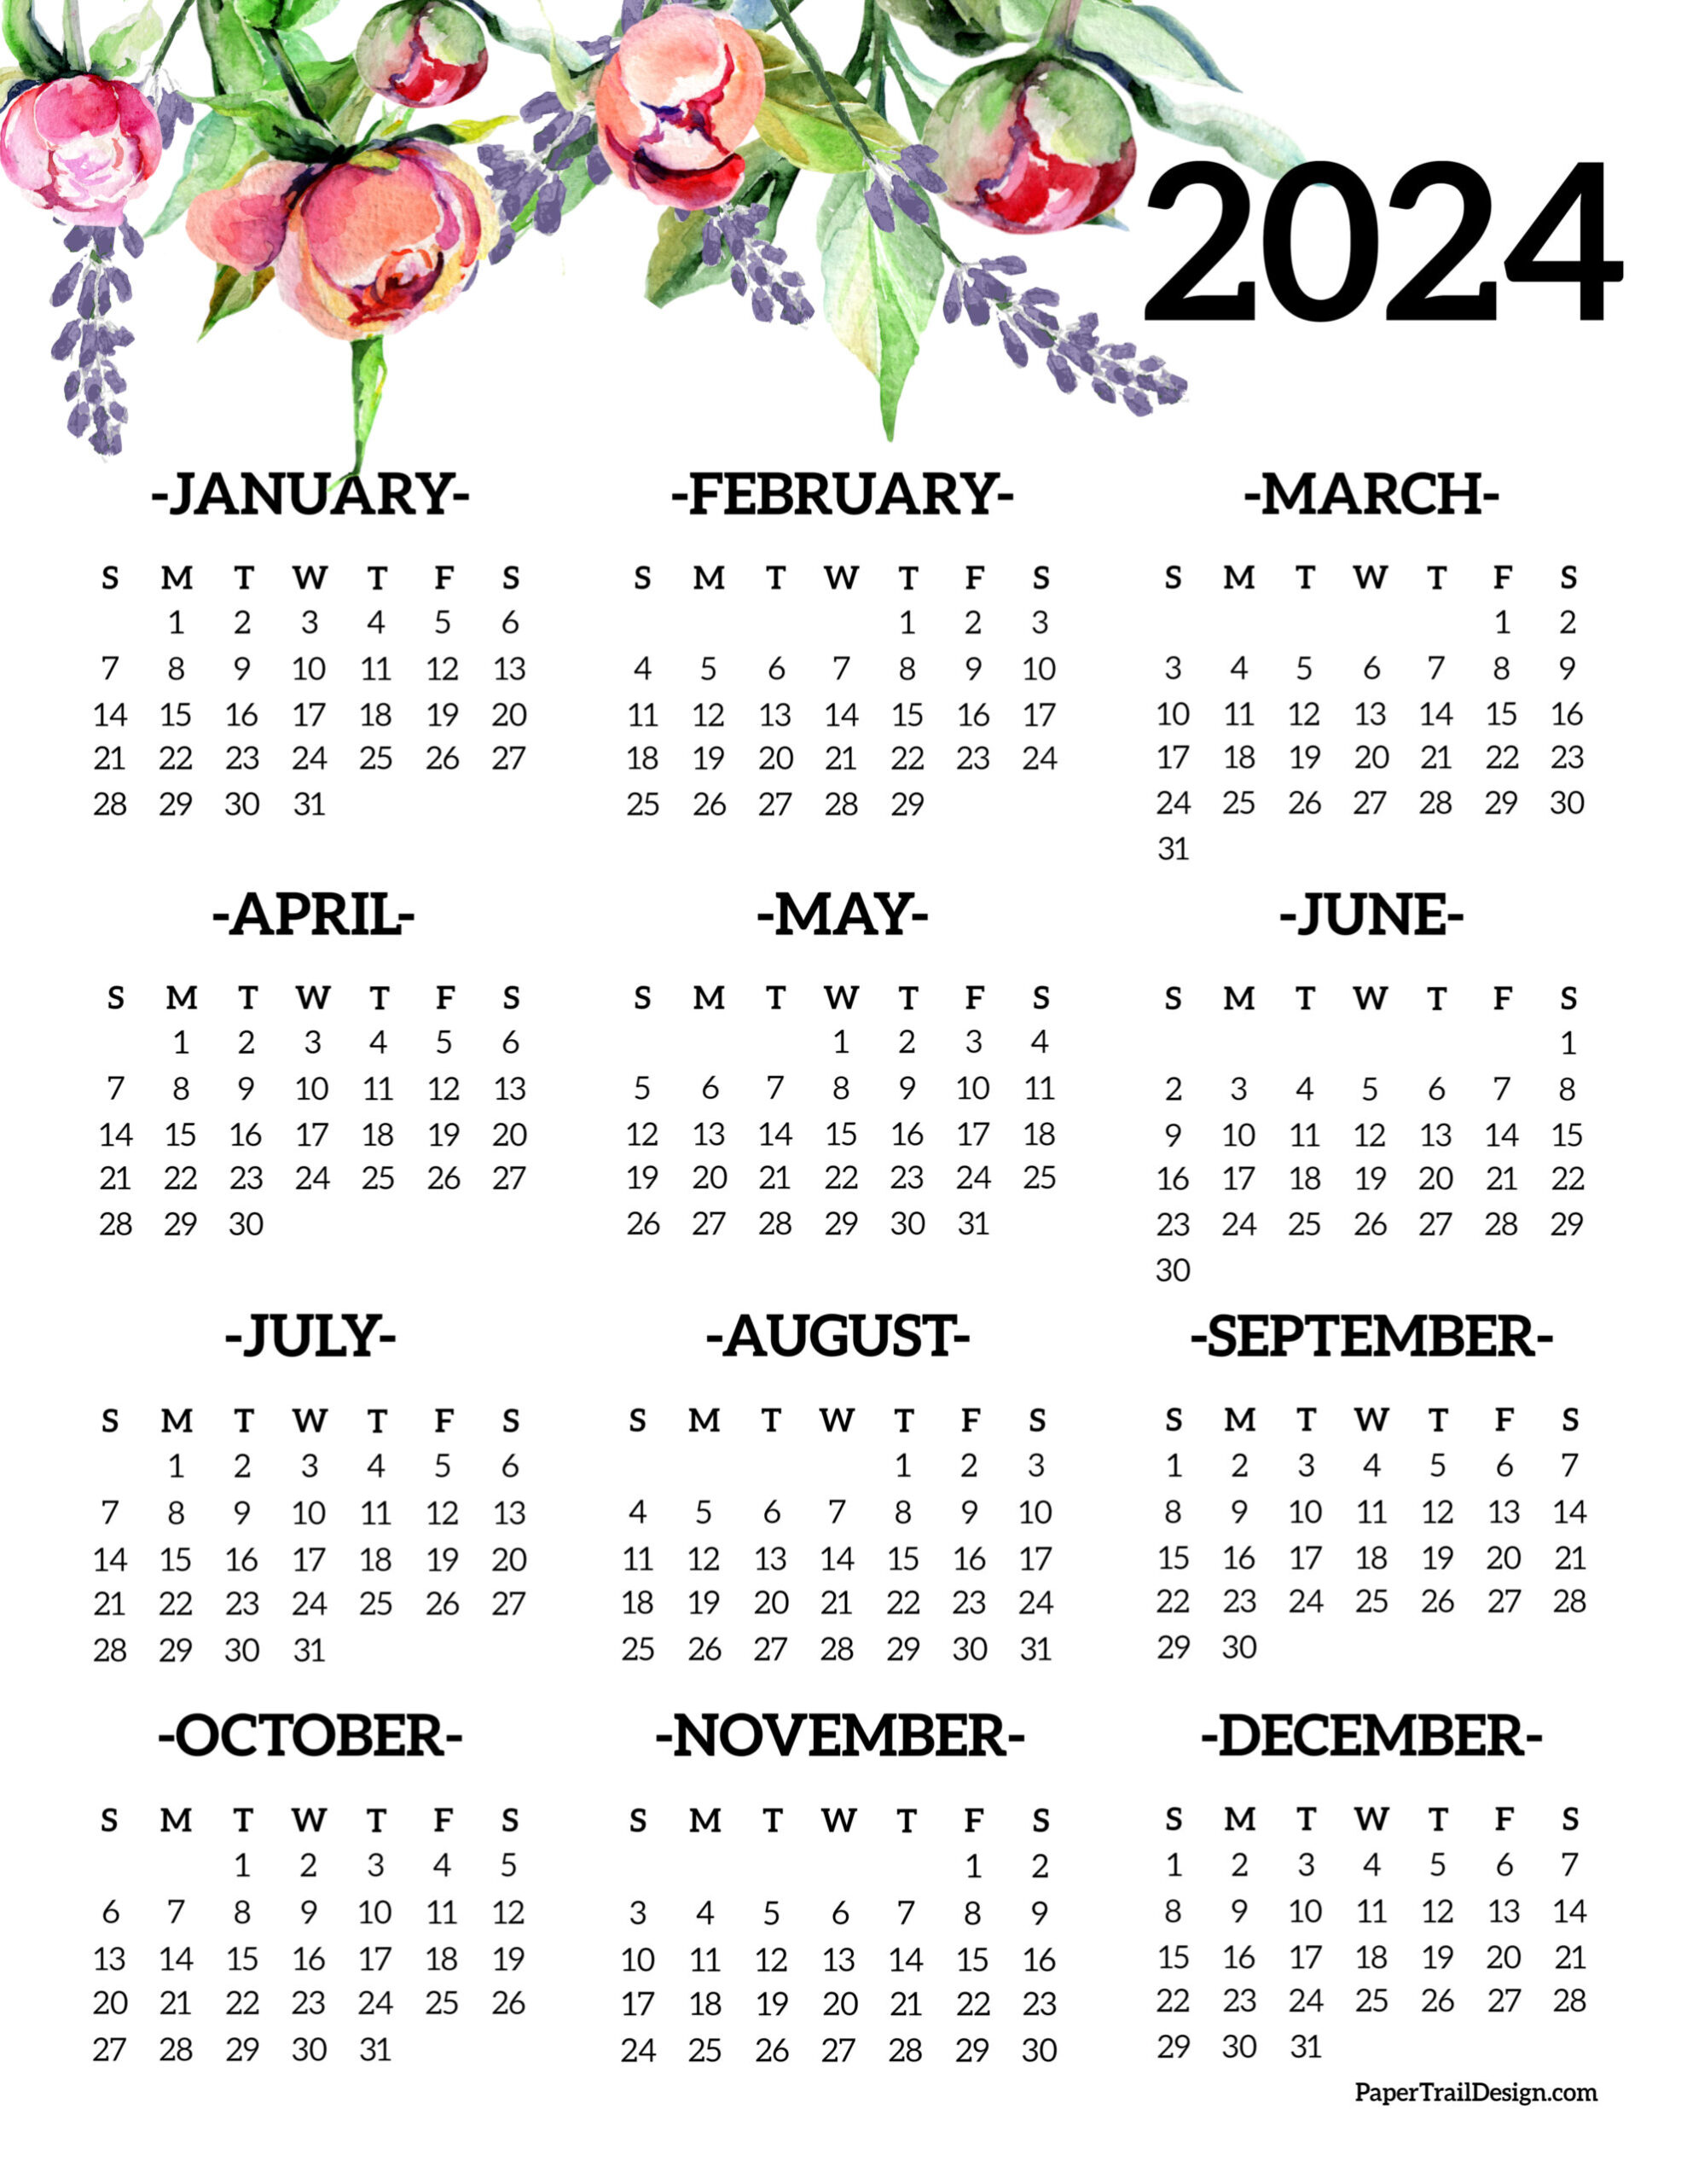 Calendar 2024 Printable One Page - Paper Trail Design for Year On A Page Calendar 2024 Printable